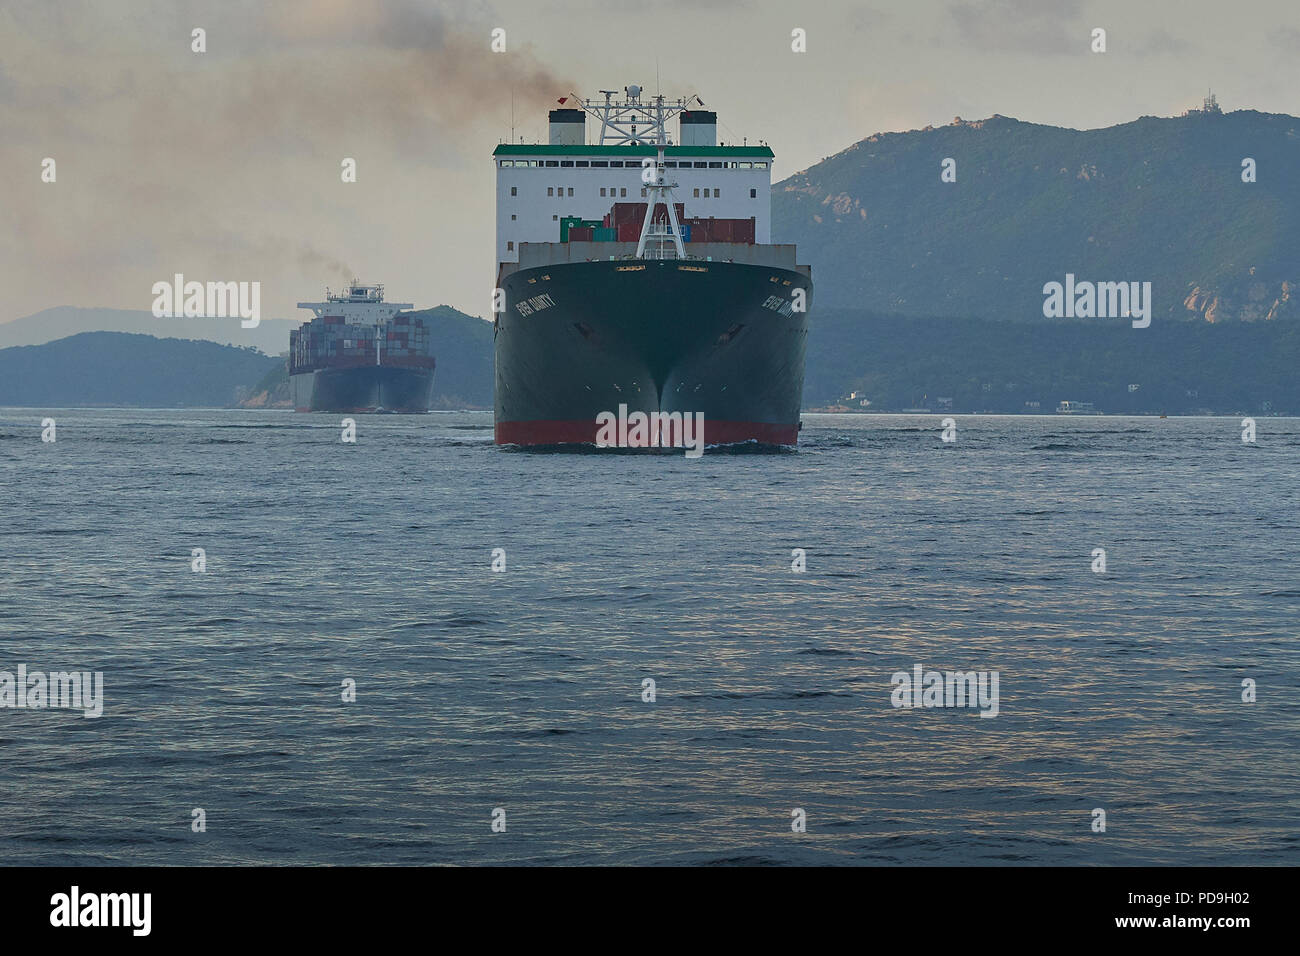 Evergreen Container Ship, EVER DAINTY, In The Busy East Lamma Shipping Channel, Heading For The Kwai Tsing Container Terminal, Hong Kong, China Stock Photo